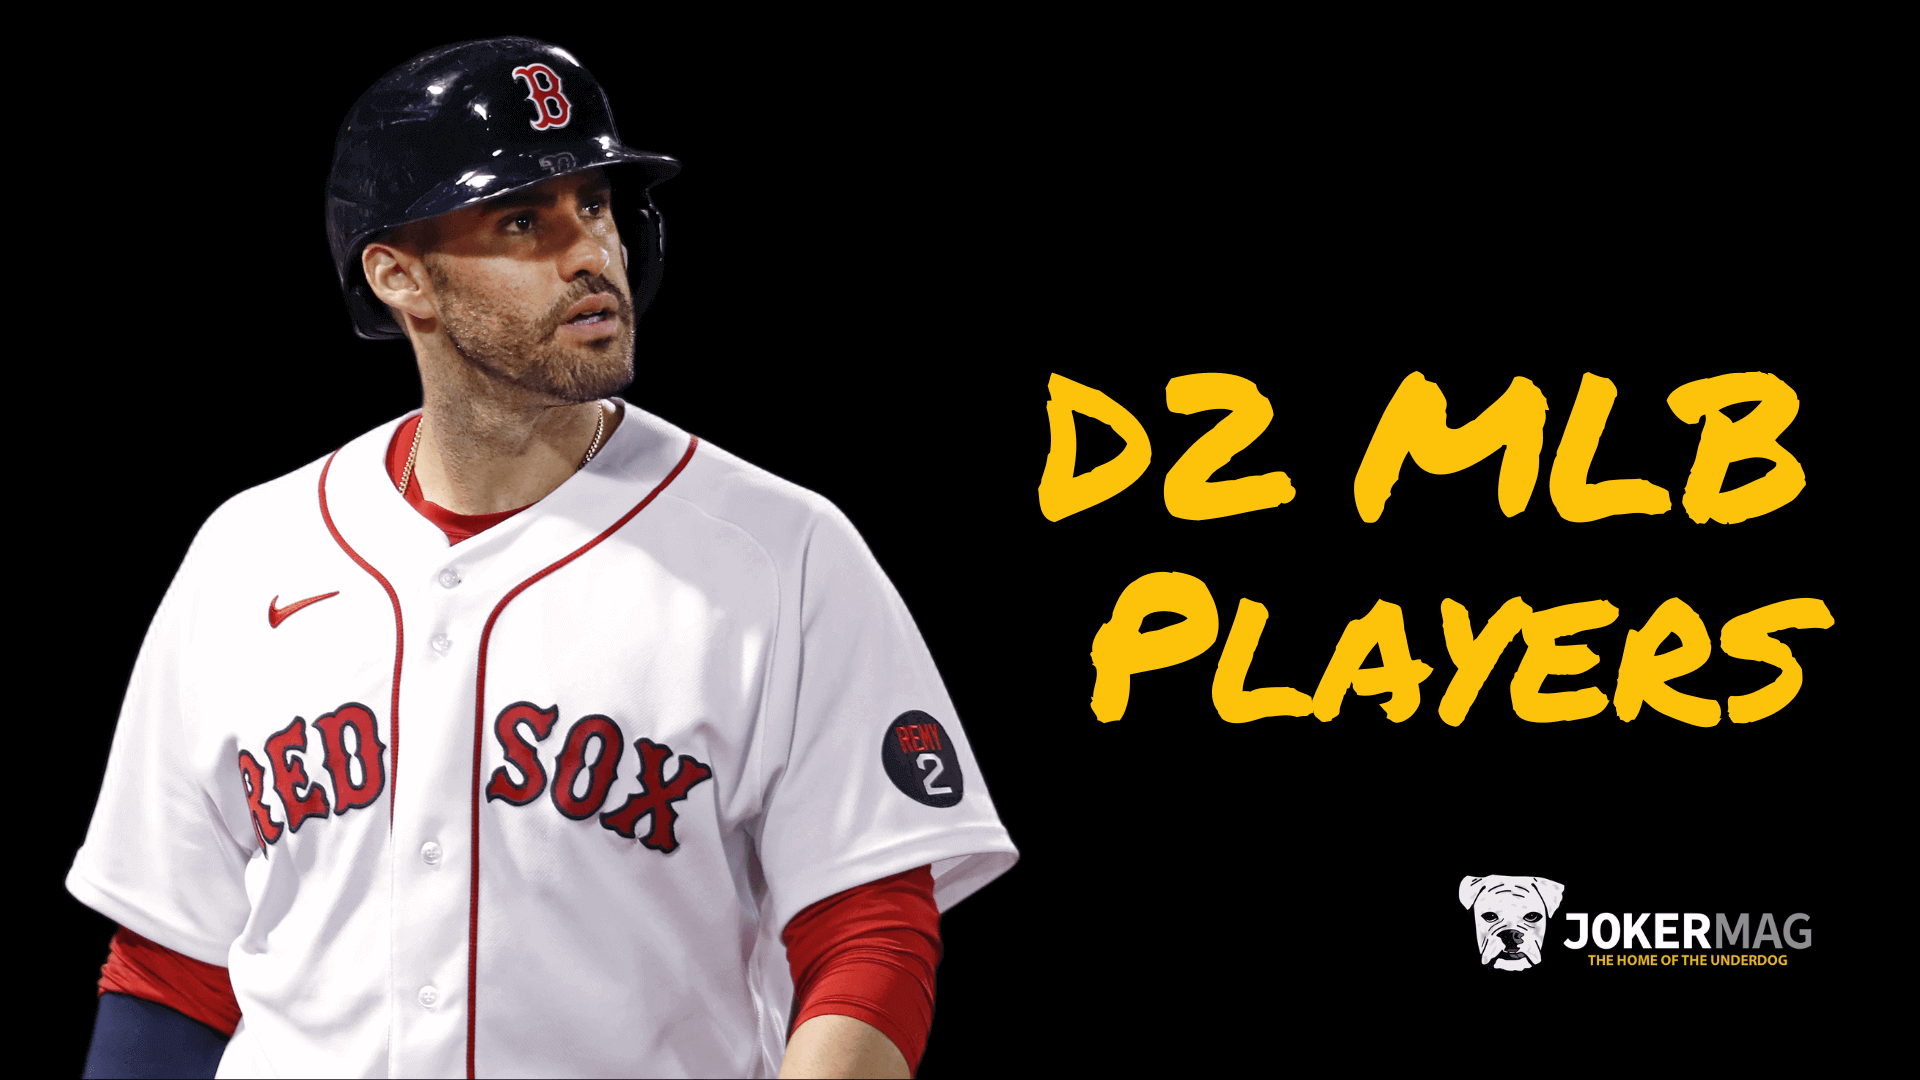 D2 MLB Players include J.D. Martinez and more